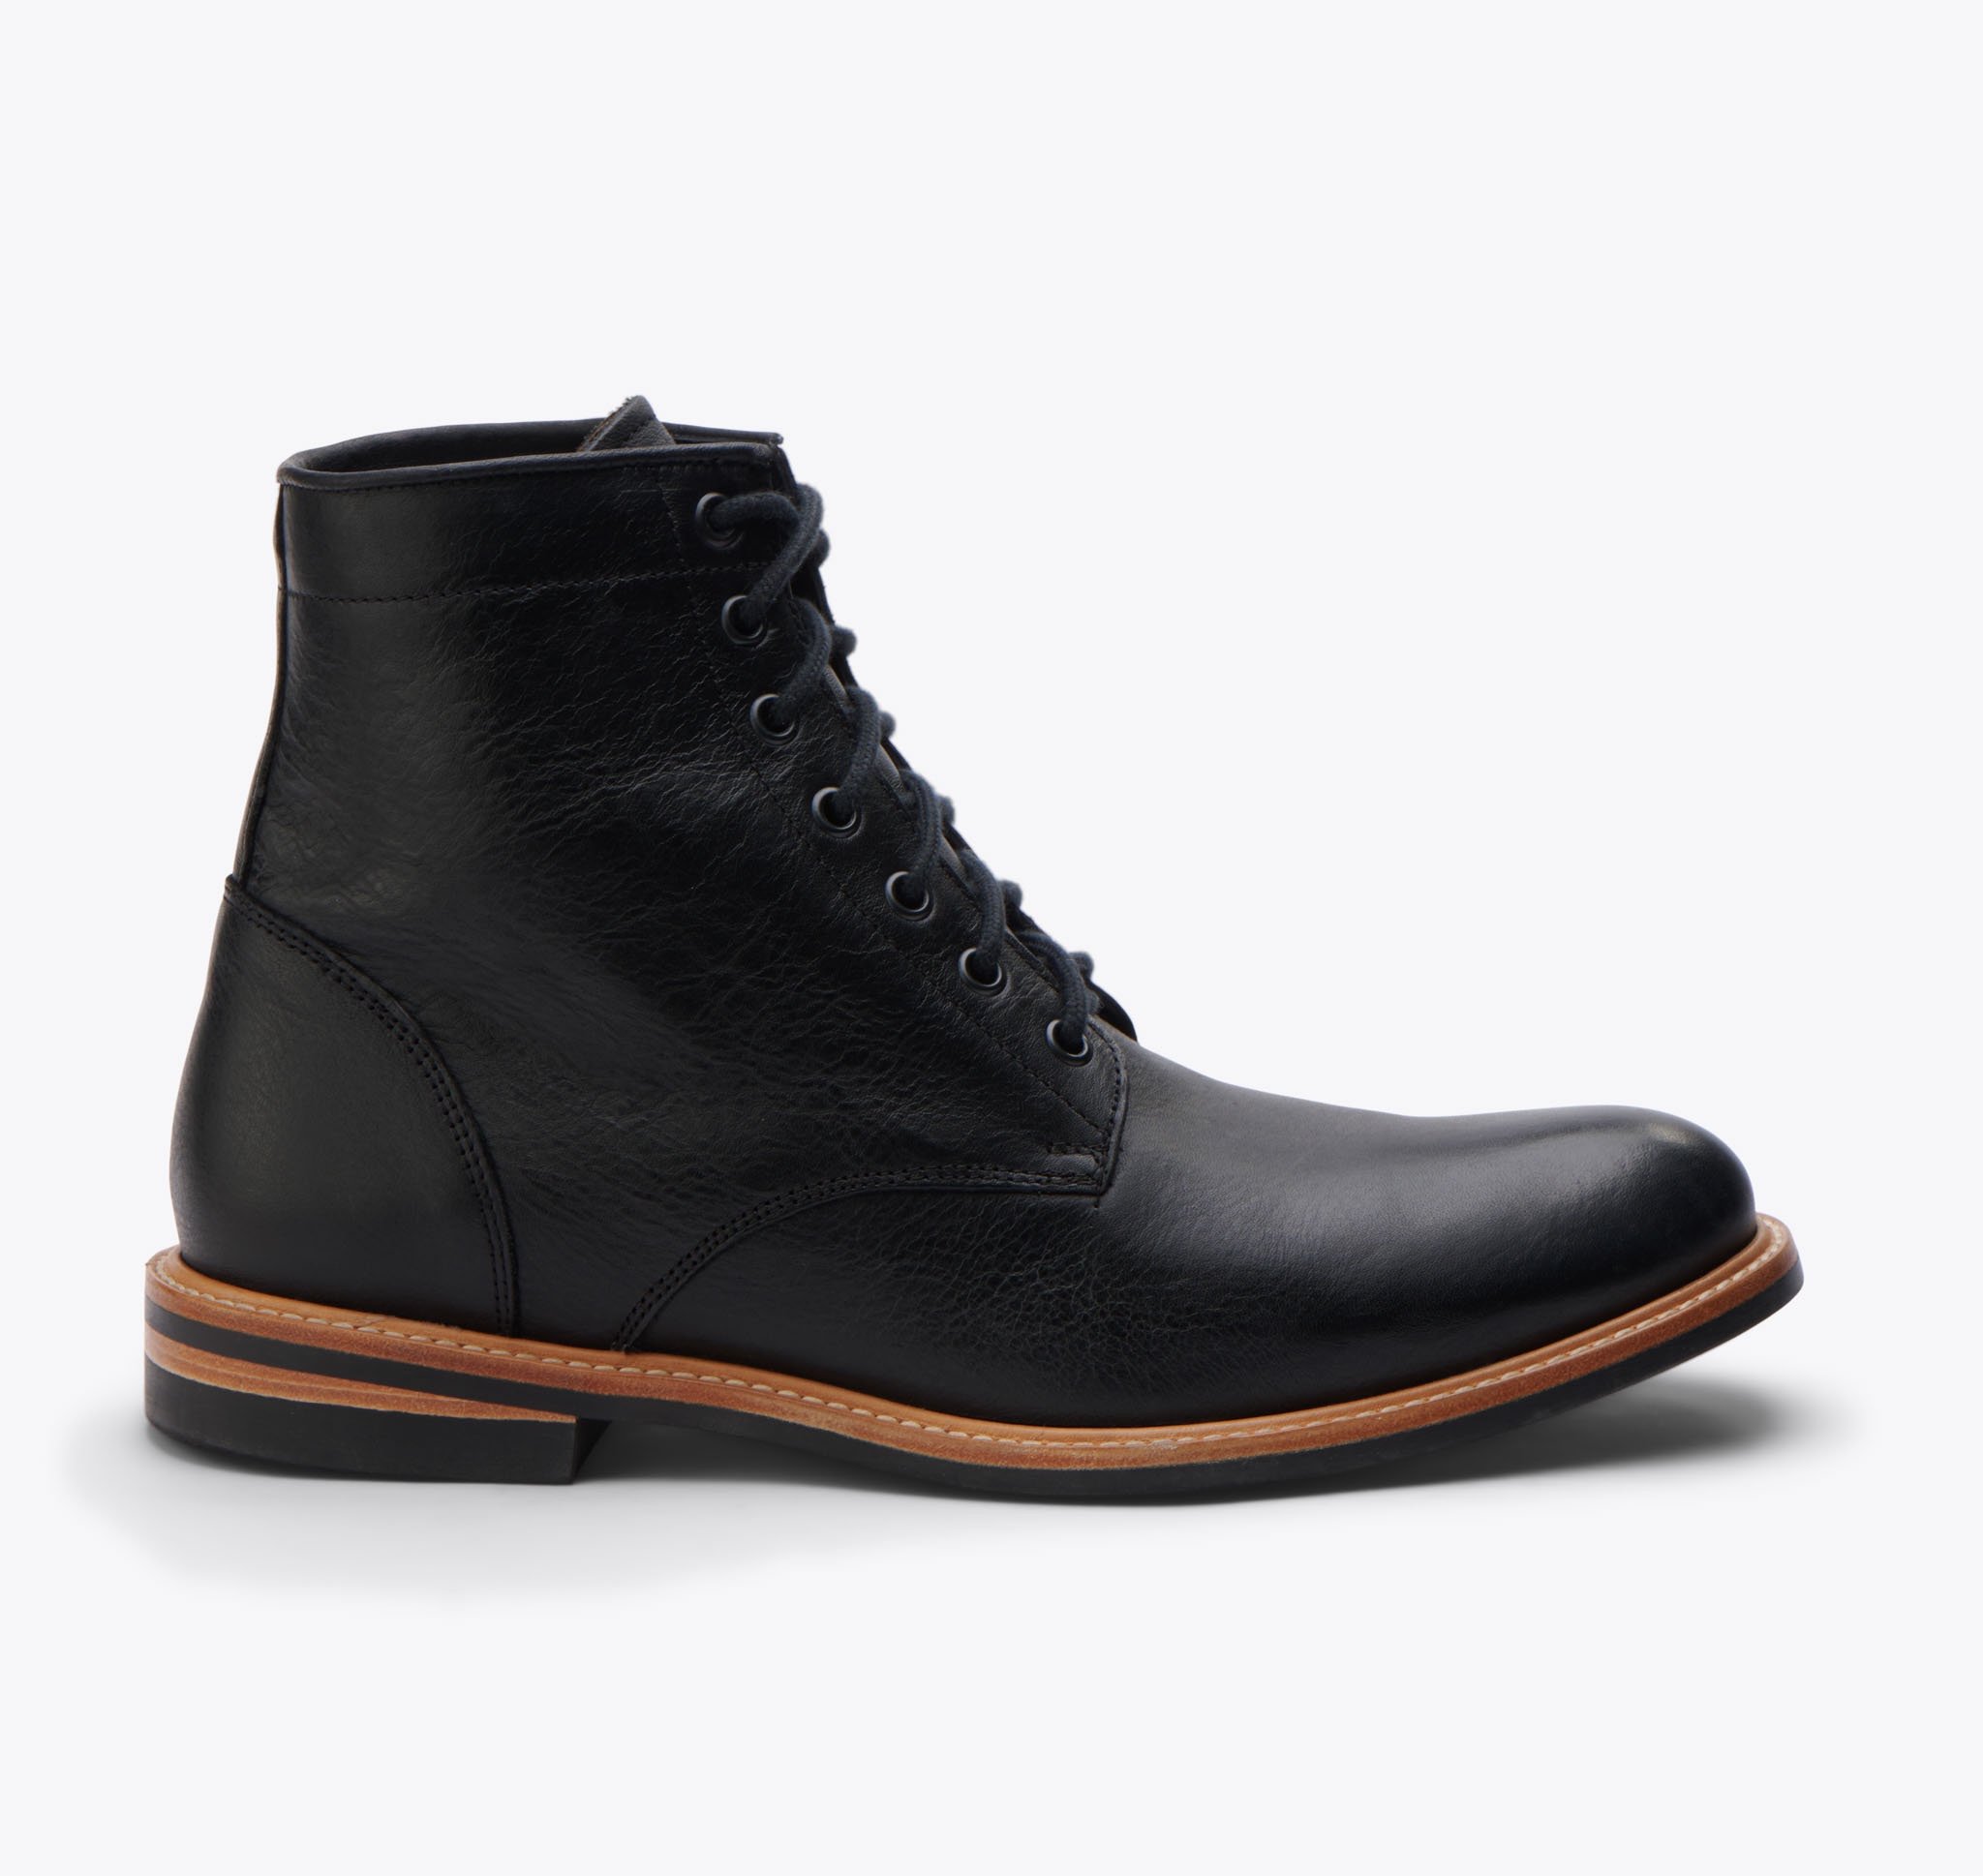 Nisolo All-Weather Andres Boot Black - Every Nisolo product is built on the foundation of comfort, function, and design. 